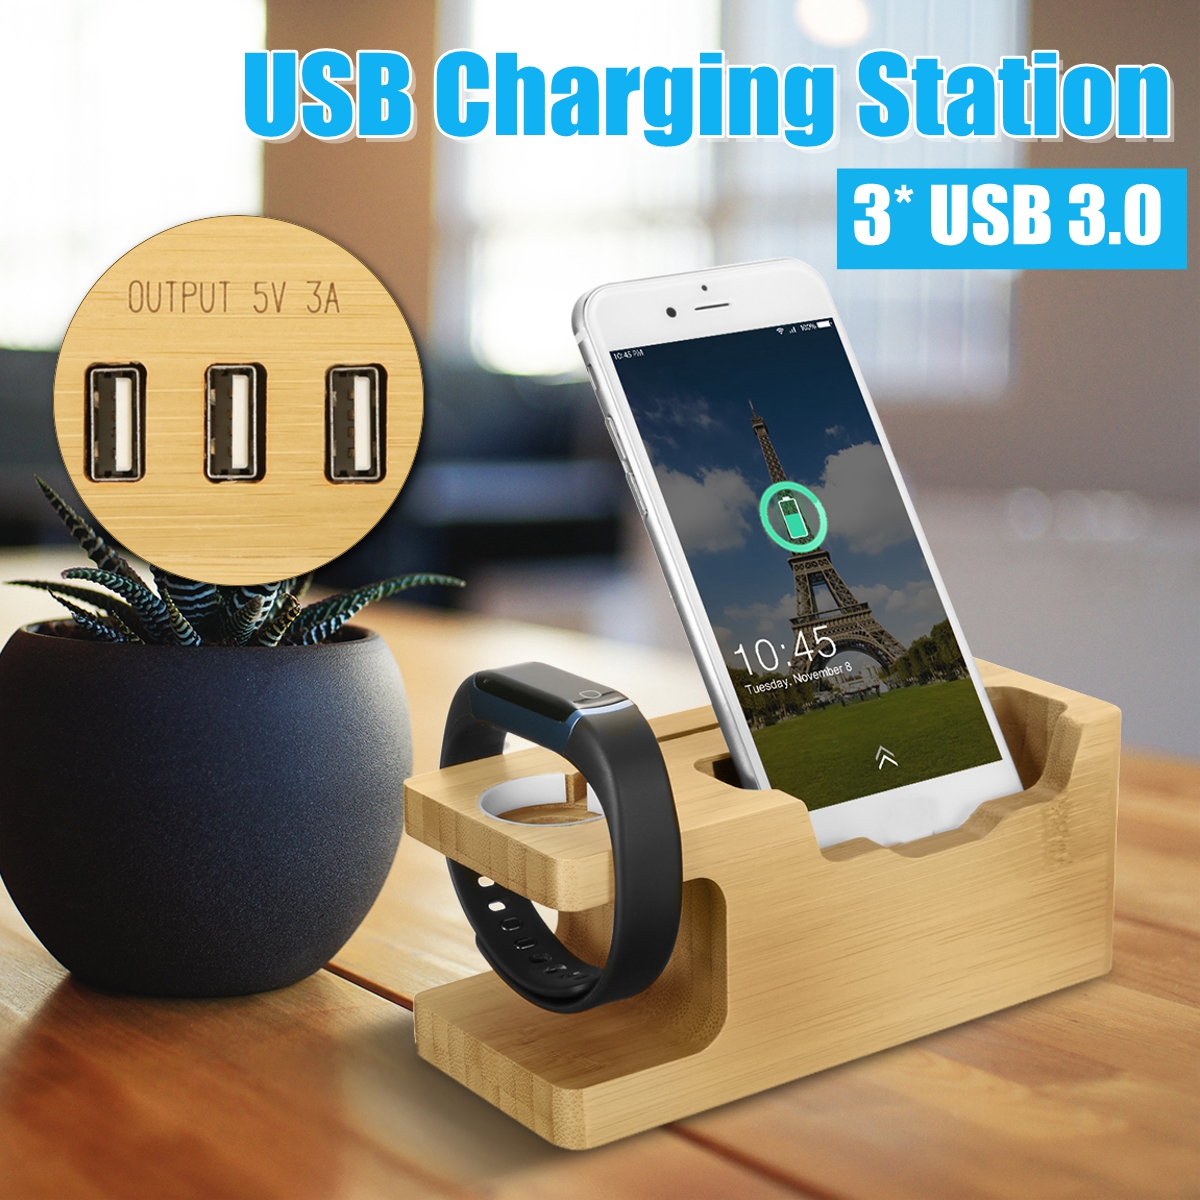 Bakeey-3USB-Charging-Station-Phone-Dock-Station-Fast-Charging-For-iPhone-XS-11Pro-MI10-Huawei-P30-P4-1720210-5